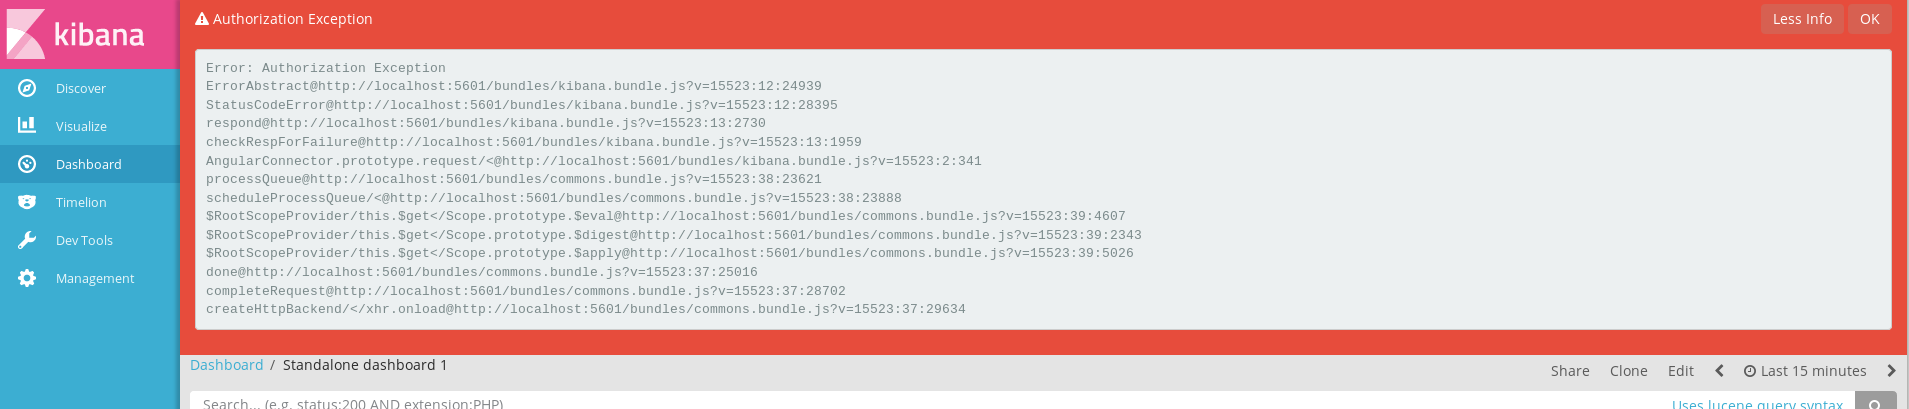 Kibana exceptions, a red stripe on the top of the screen.